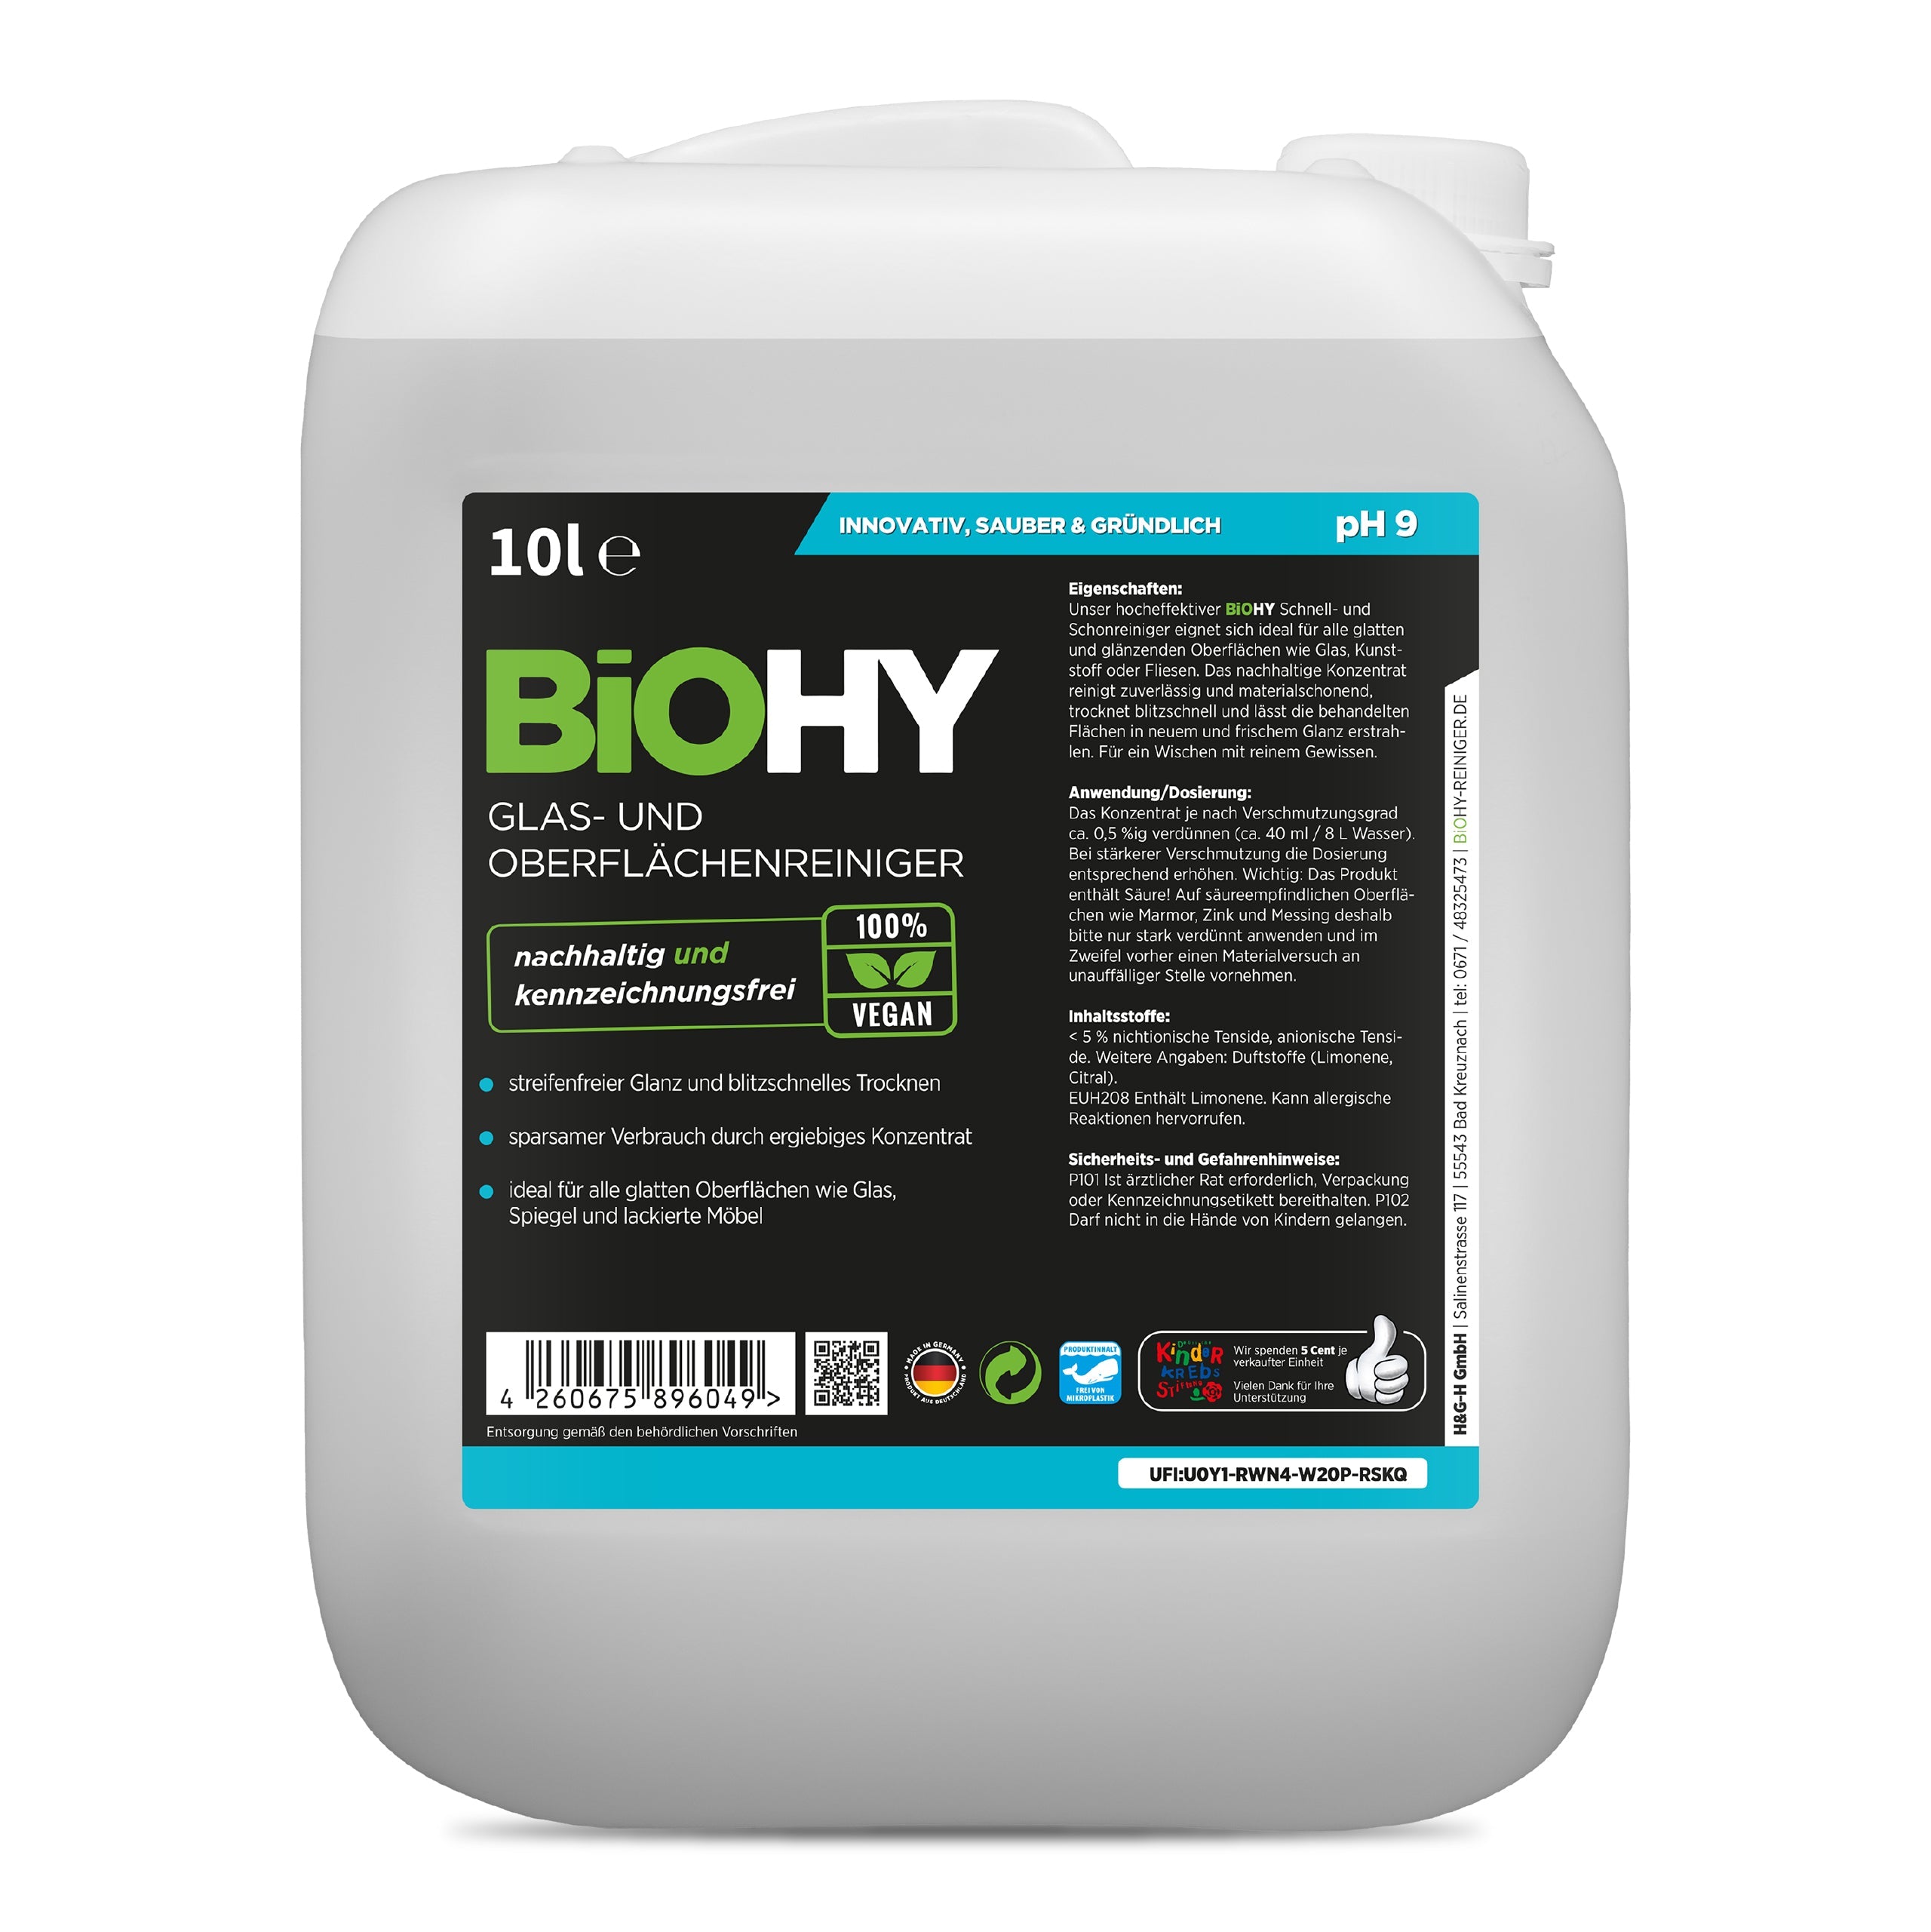 BiOHY glass and surface cleaner, glass cleaner, surface cleaner, window cleaning agent